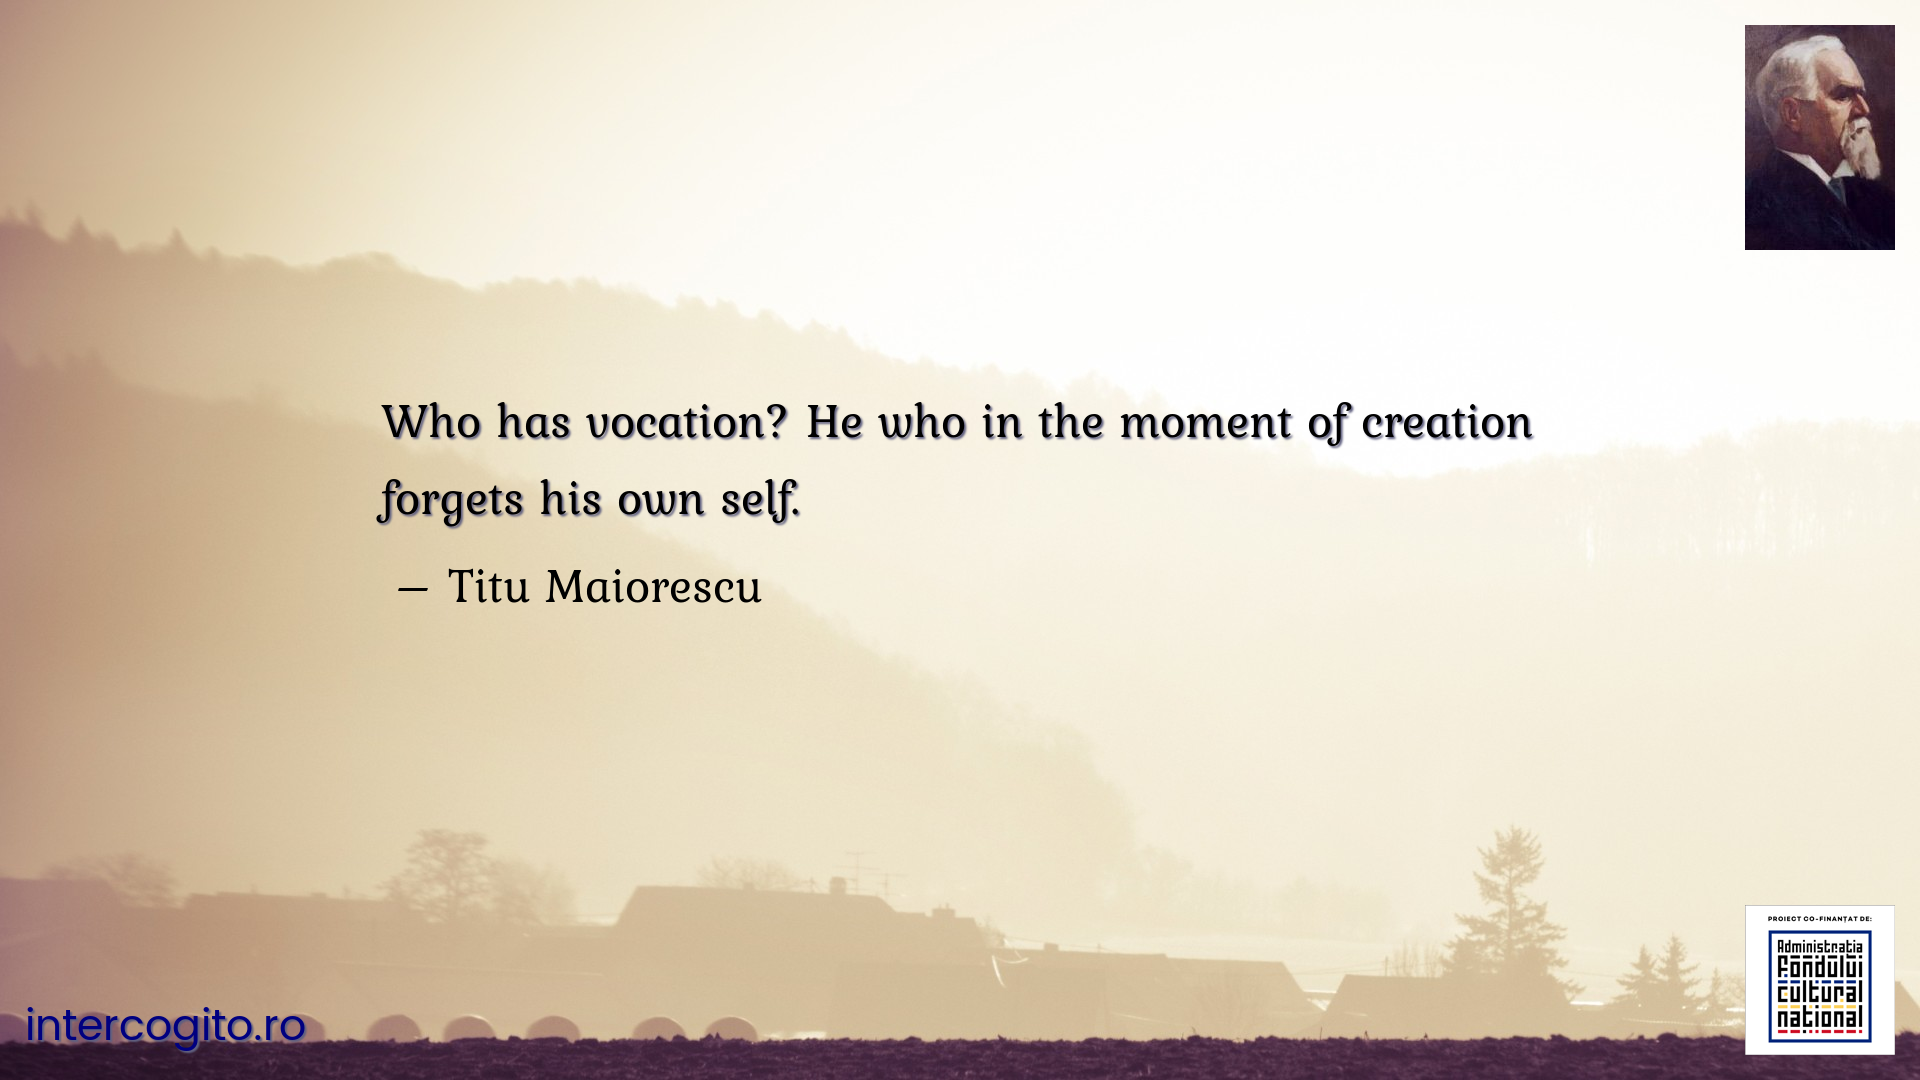 Who has vocation? He who in the moment of creation forgets his own self.